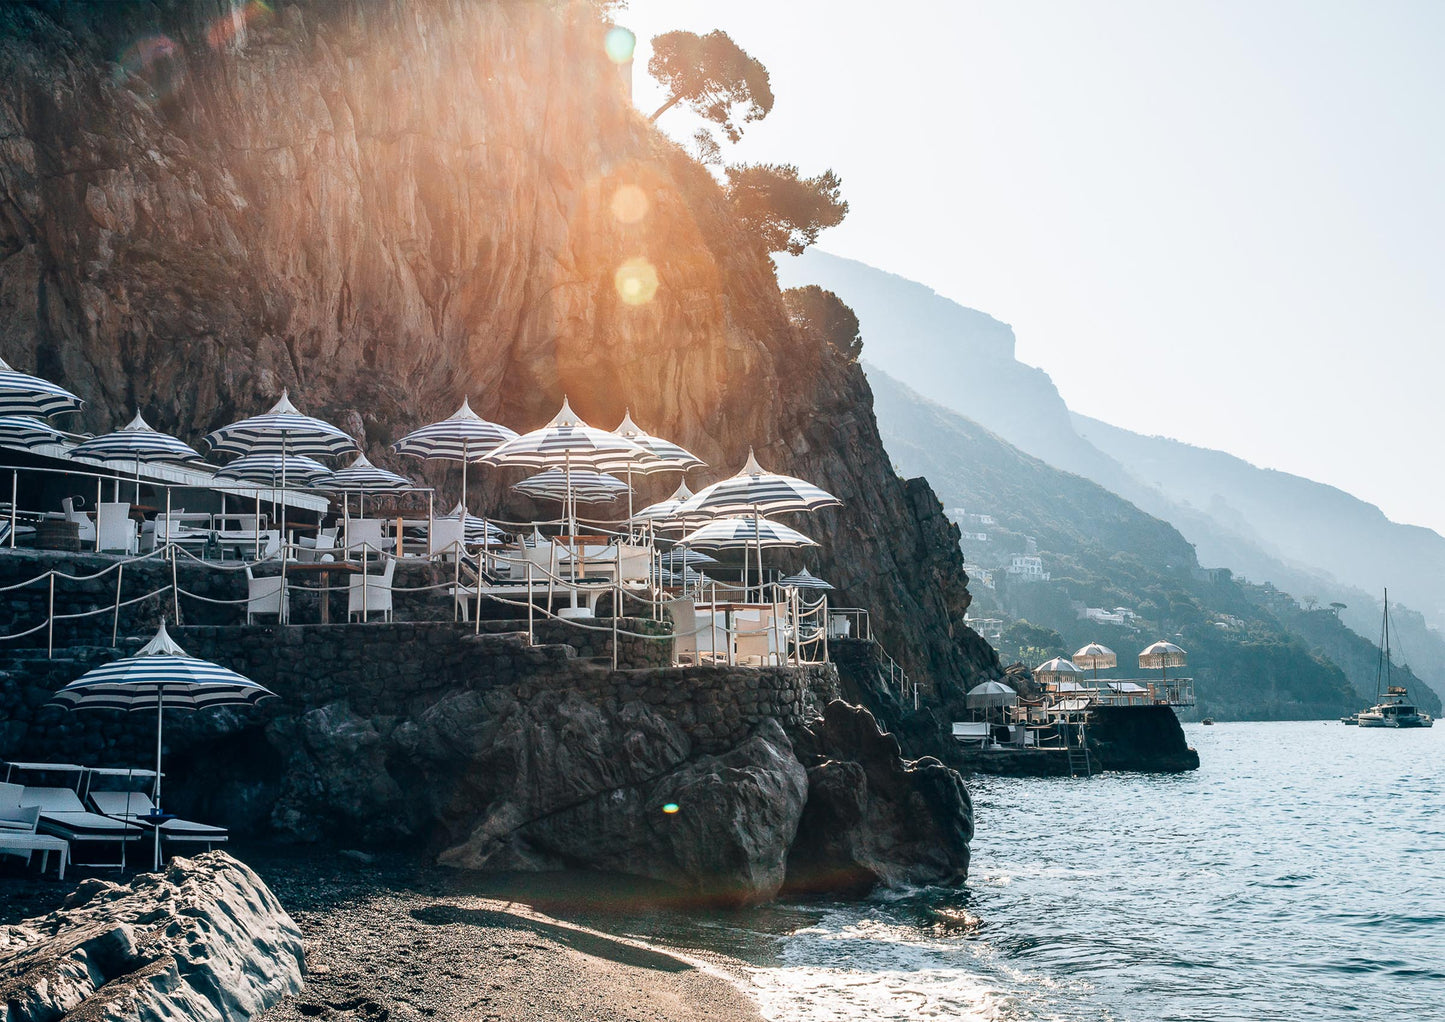 Morning Glow at the Beach Club in Positano, Italy